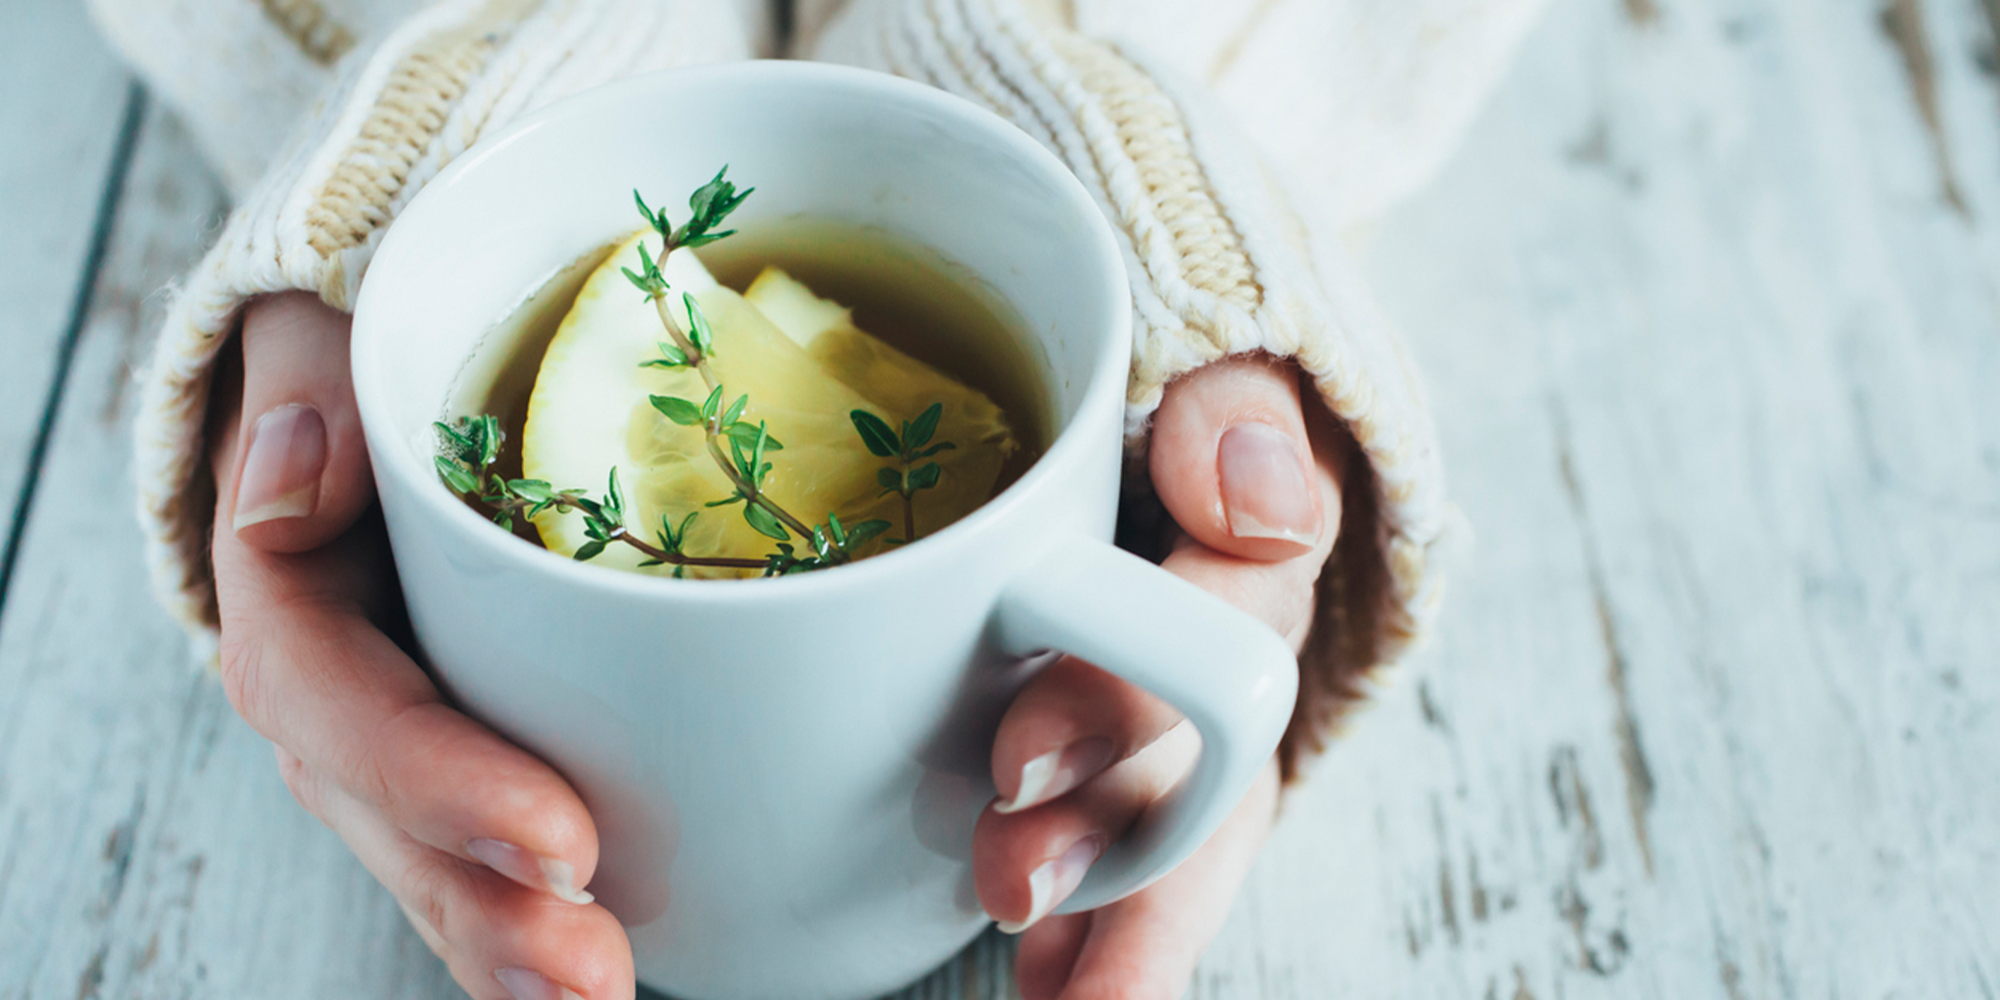 Ways to Naturally Stay Healthy During Cold & Flu Season